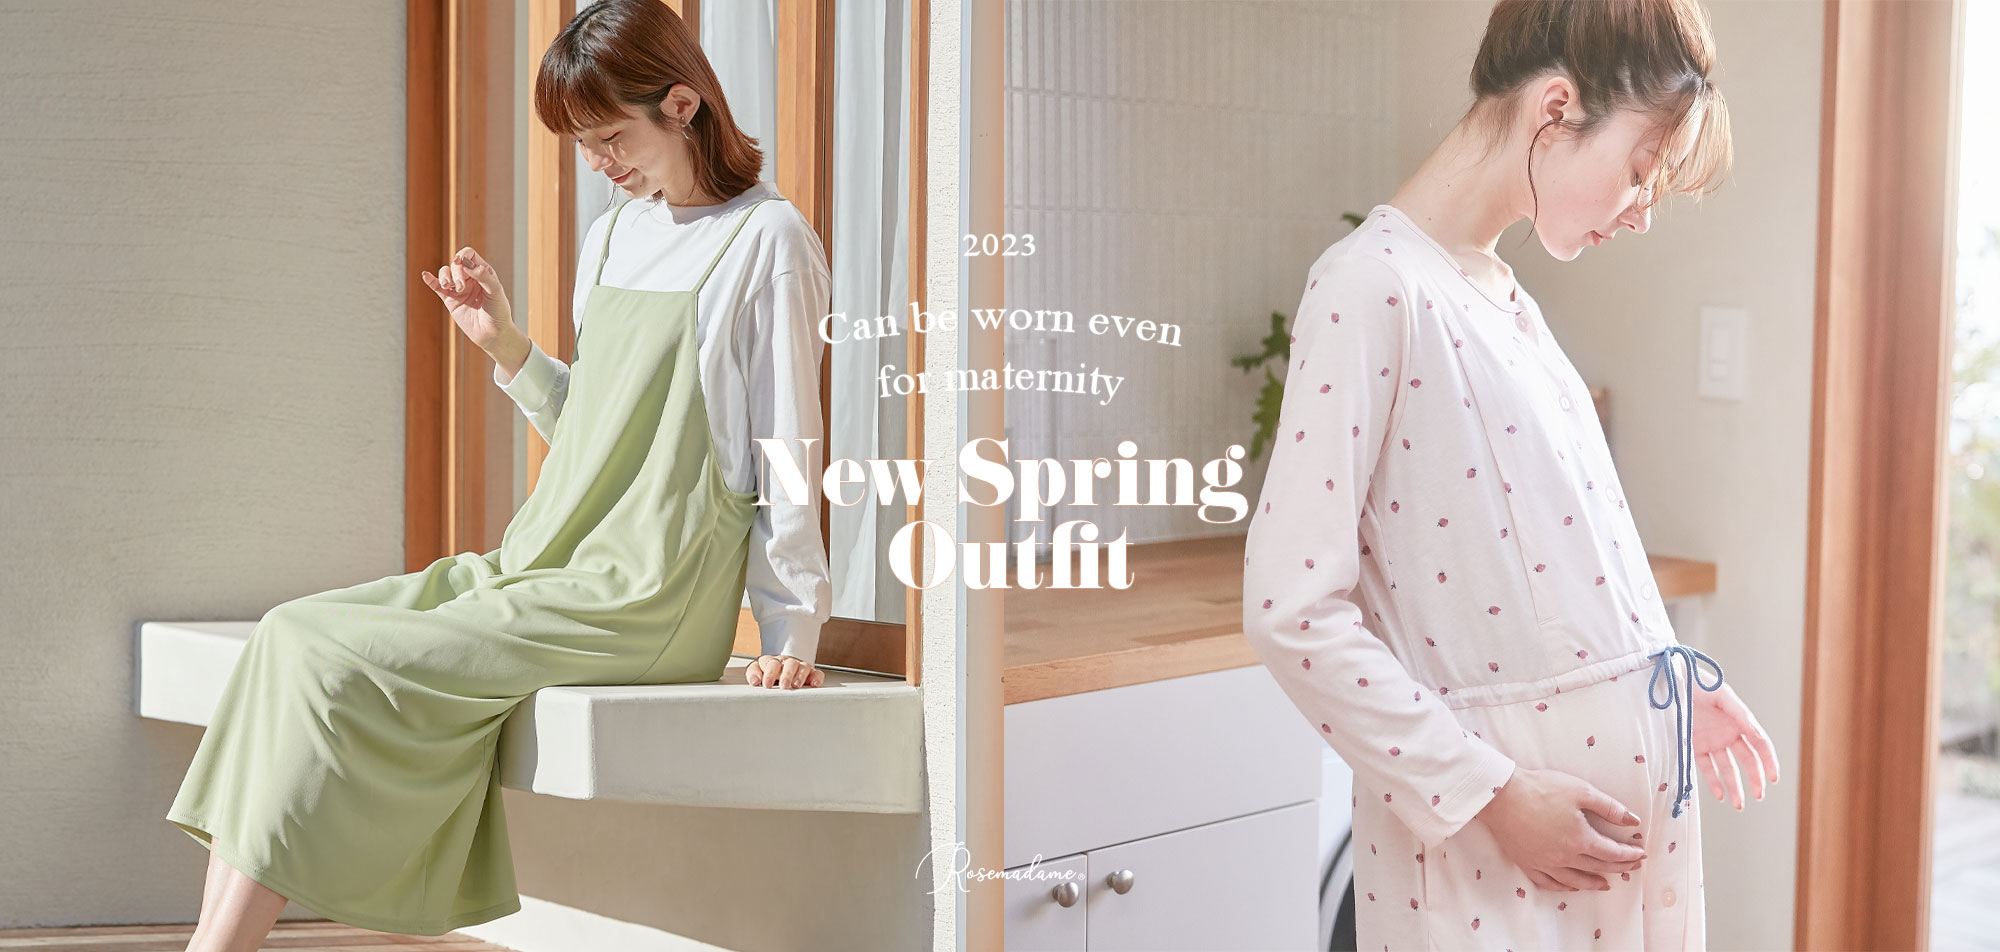 New Spring Outfit vol.2